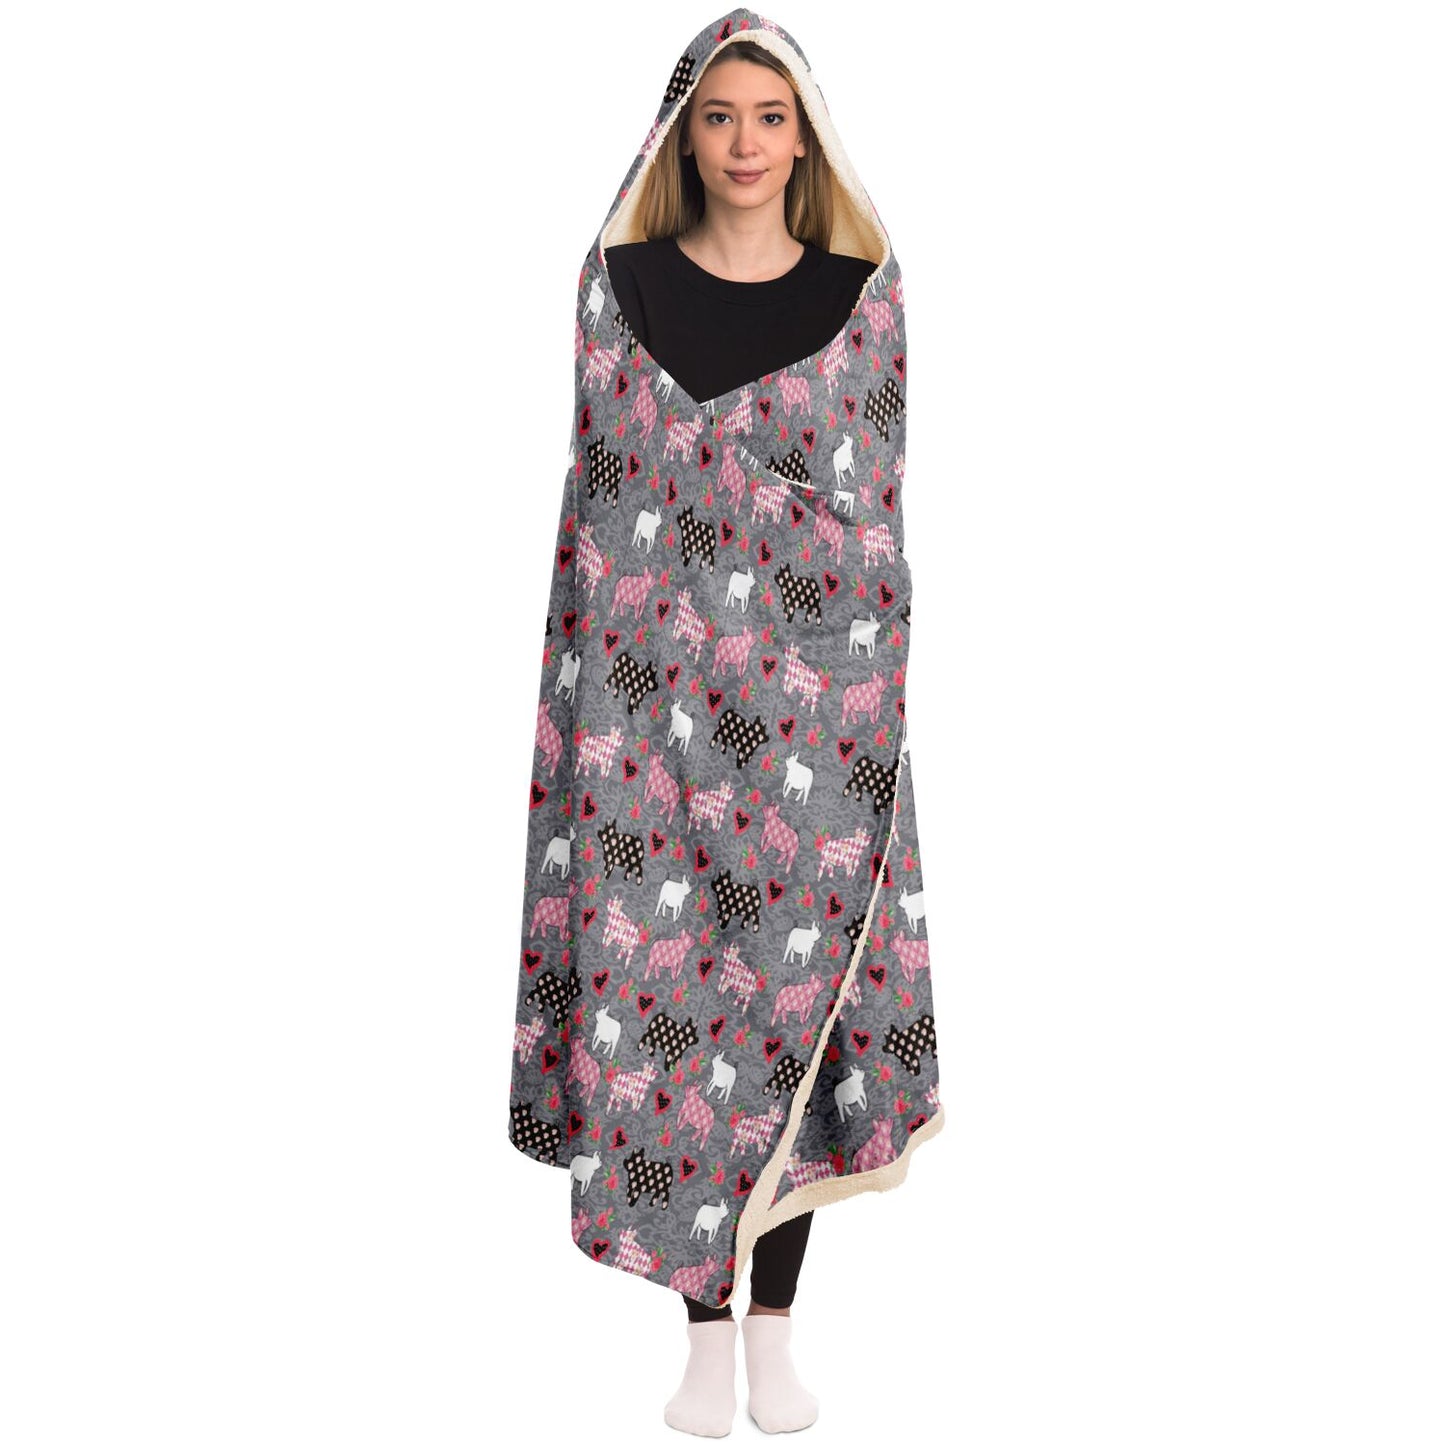 Cute Livestock Show Pigs with Hearts Hooded Blanket -All Over Print Hooded Throw